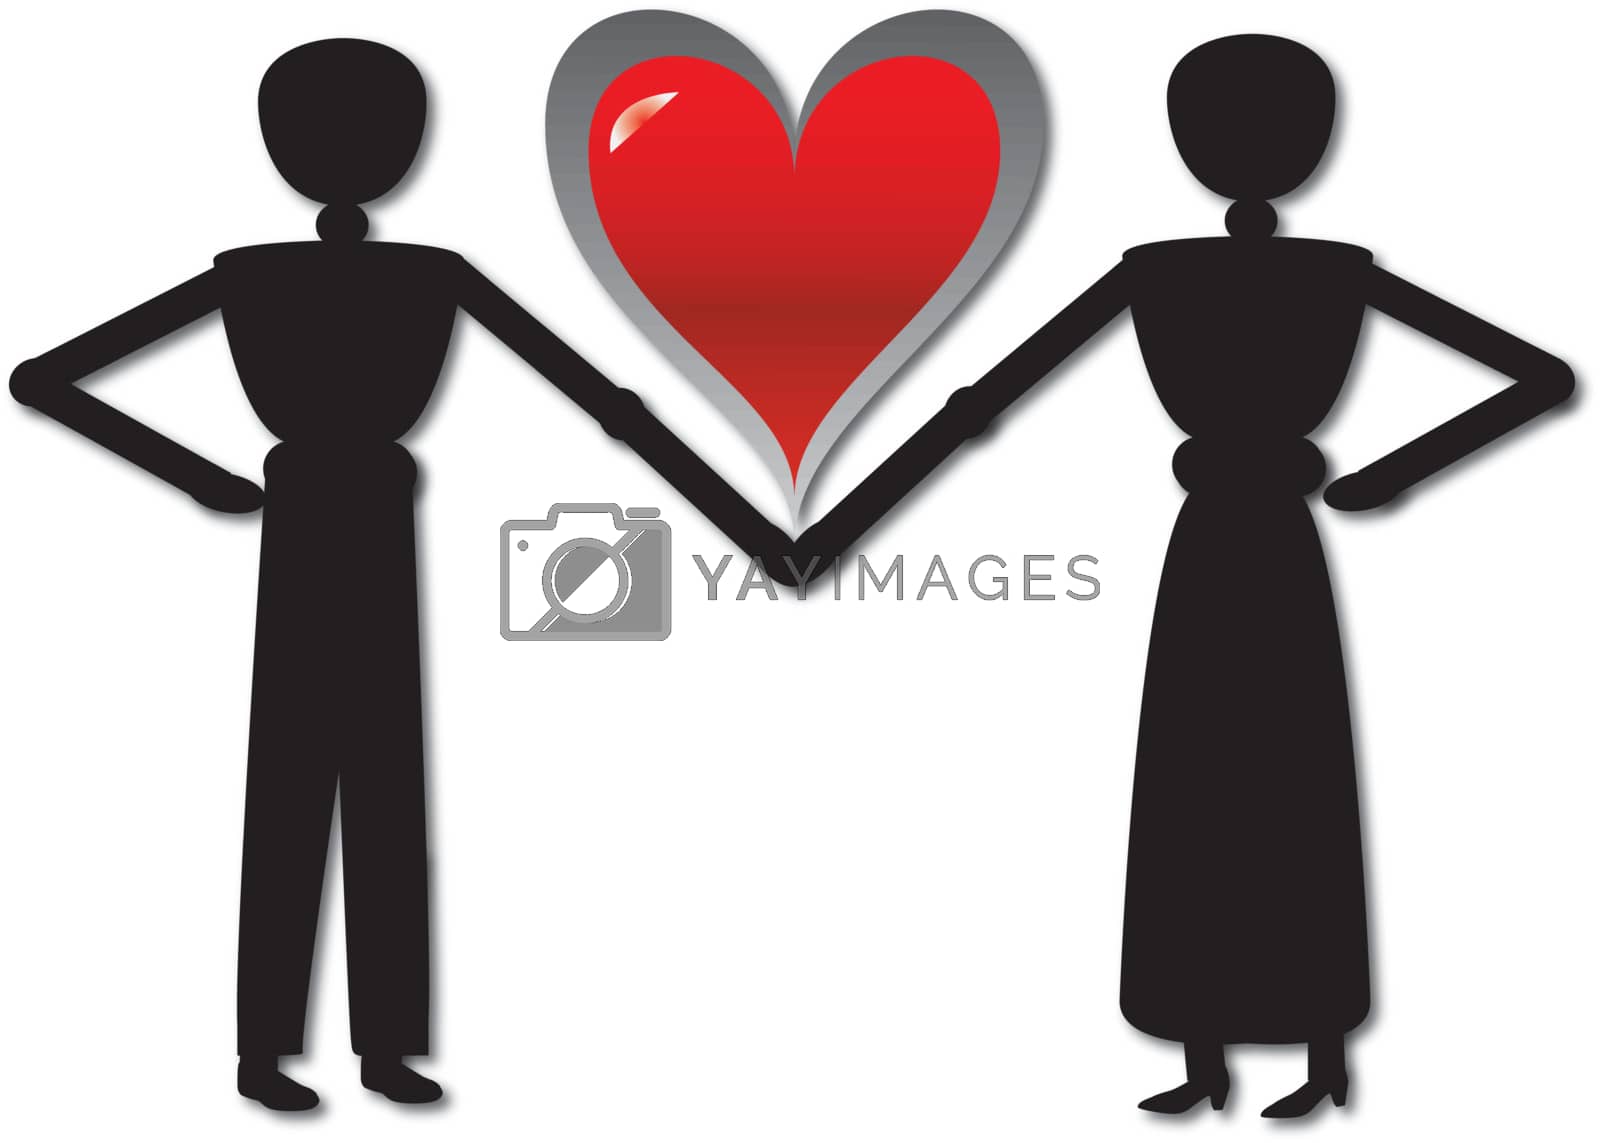 Royalty free image of couple in love by compuinfoto